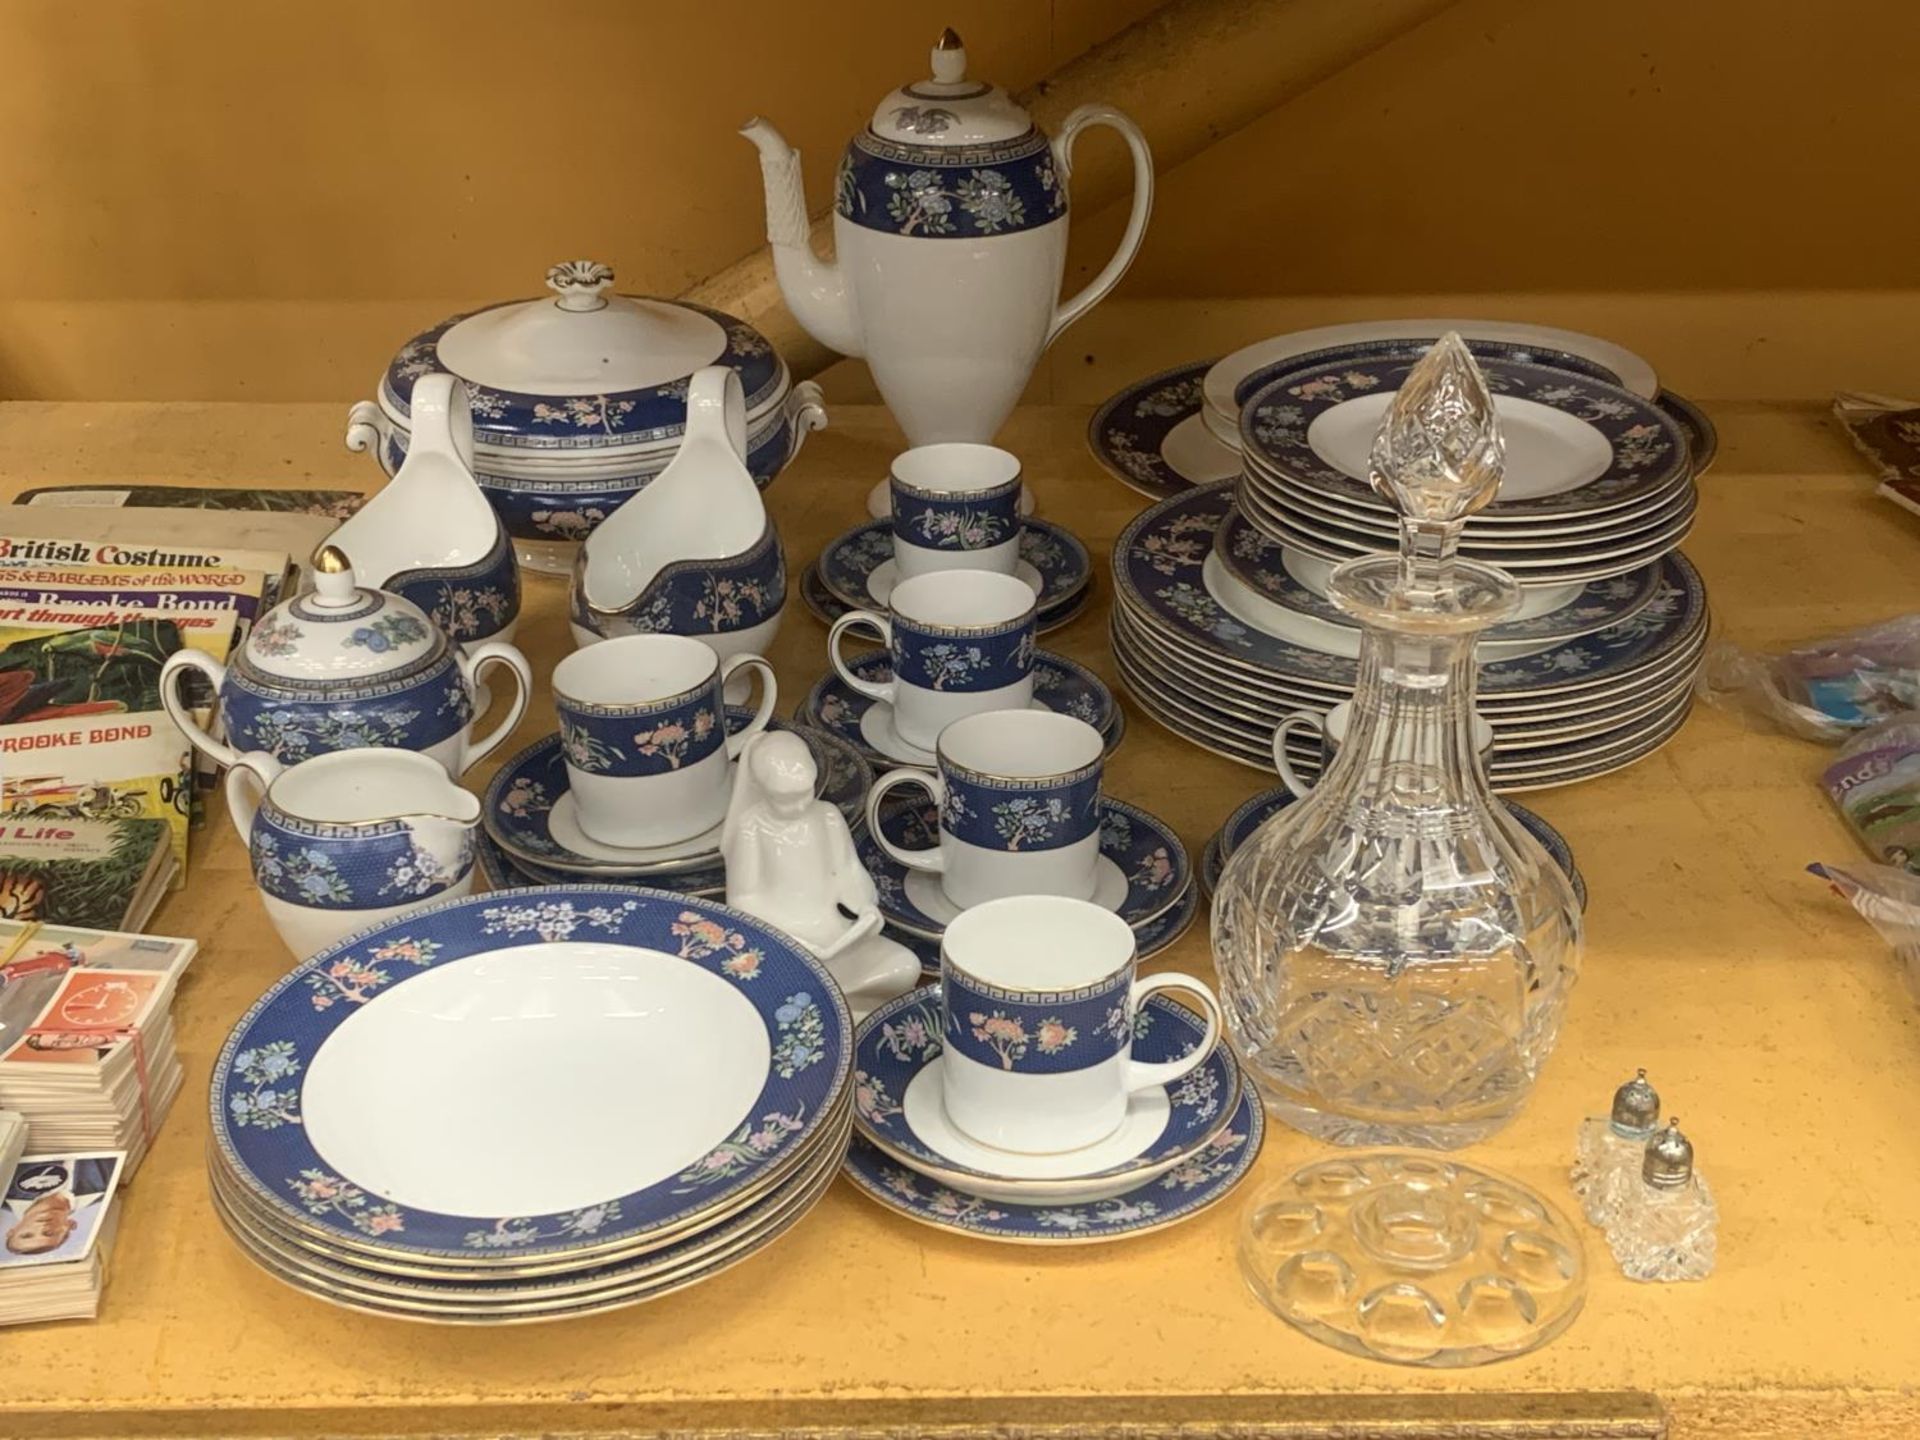 A WEDGWOOD 'BLUE SIAM' PART DINNER SERVICE TO INCLUDE VARIOUS SIZES OF PLATES, BOWLS, SERVING